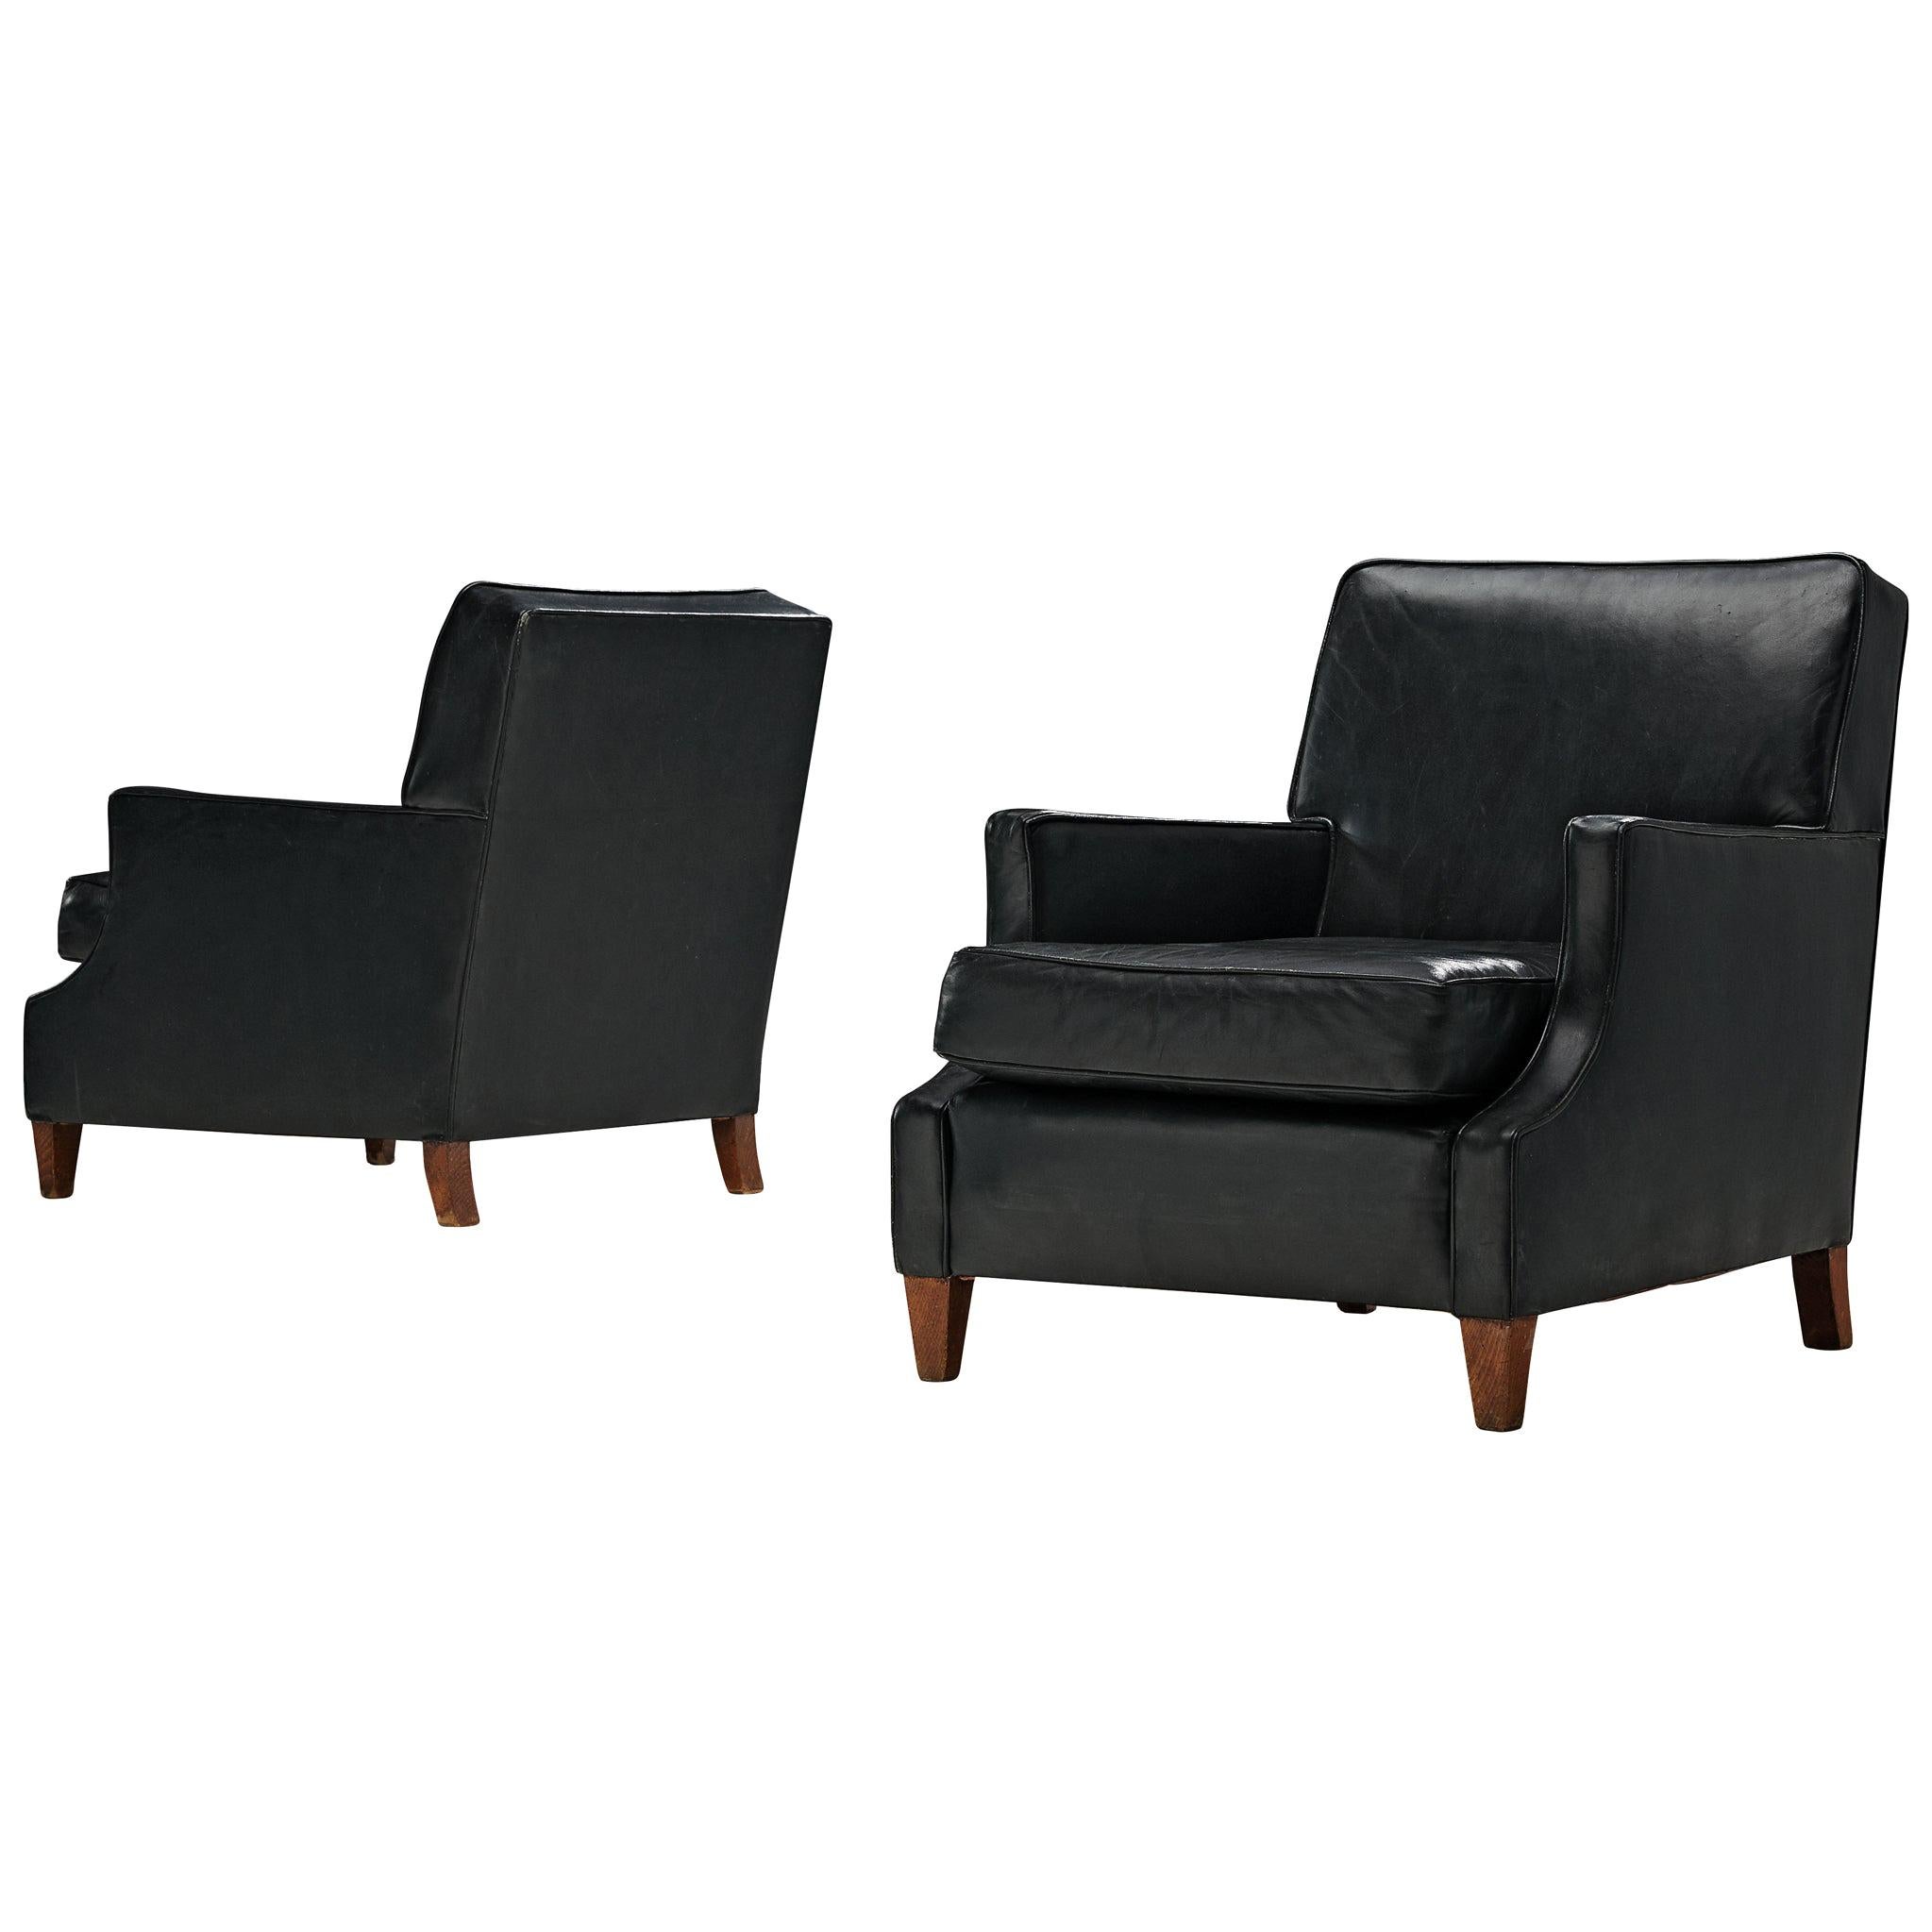 Pair of Danish Lounge Chairs in Original Black Leather